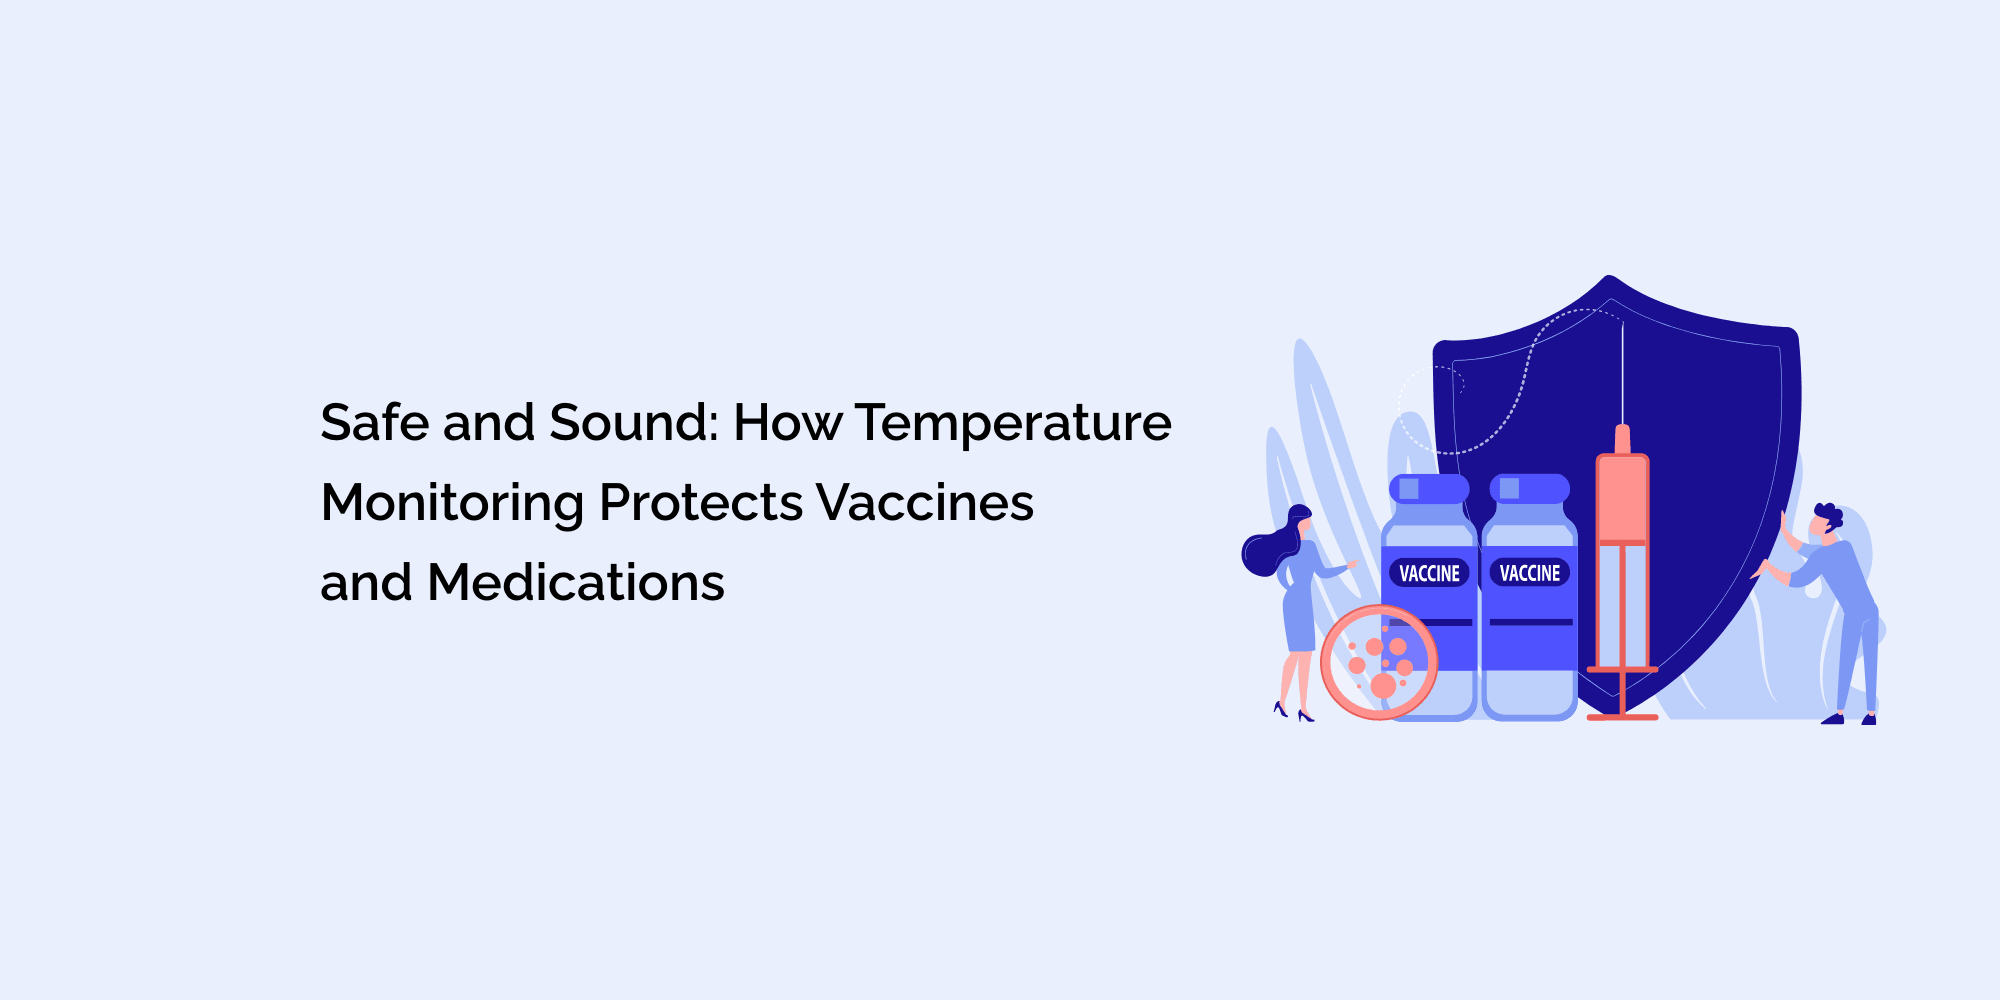 Safe and Sound: How Temperature Monitoring Protects Vaccines and Medications